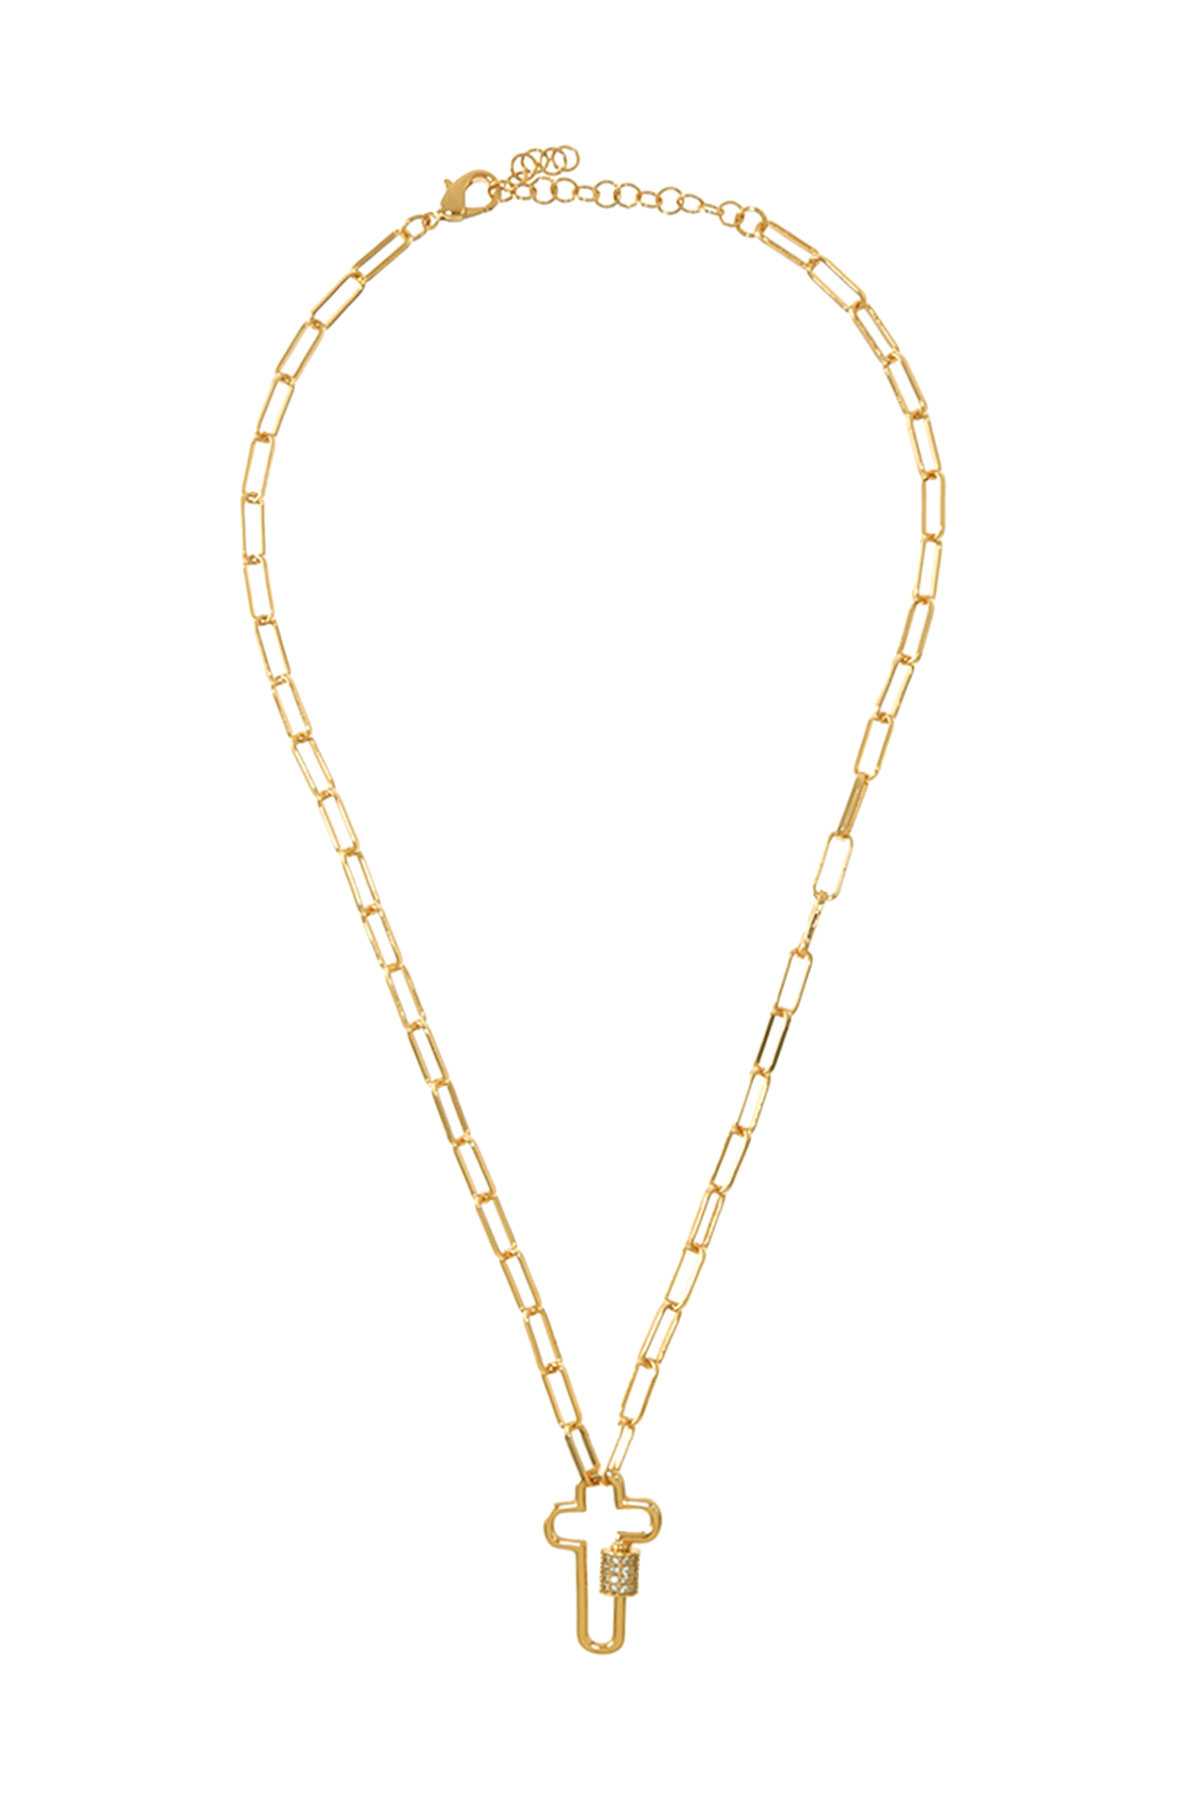 Gold Dipped Cross Rhinestone Accent Oval Chain Necklace